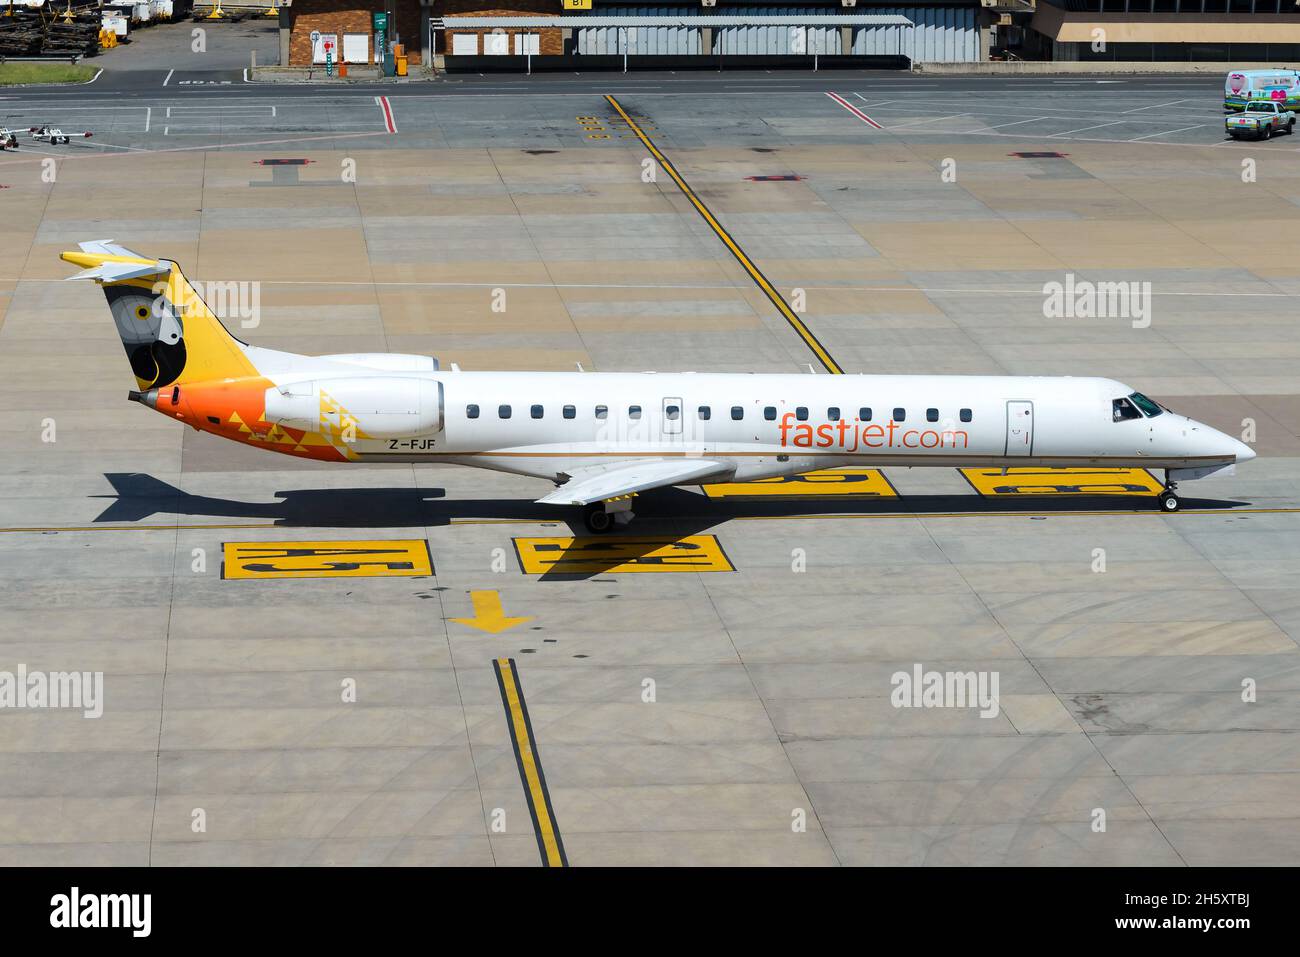 FastJet Embraer 145 aircraft taxiing inbound from Harare, Zimbabwe. Airplane Z-FJF of low cost Zimbabwean airline Fastjet Airlines. Stock Photo